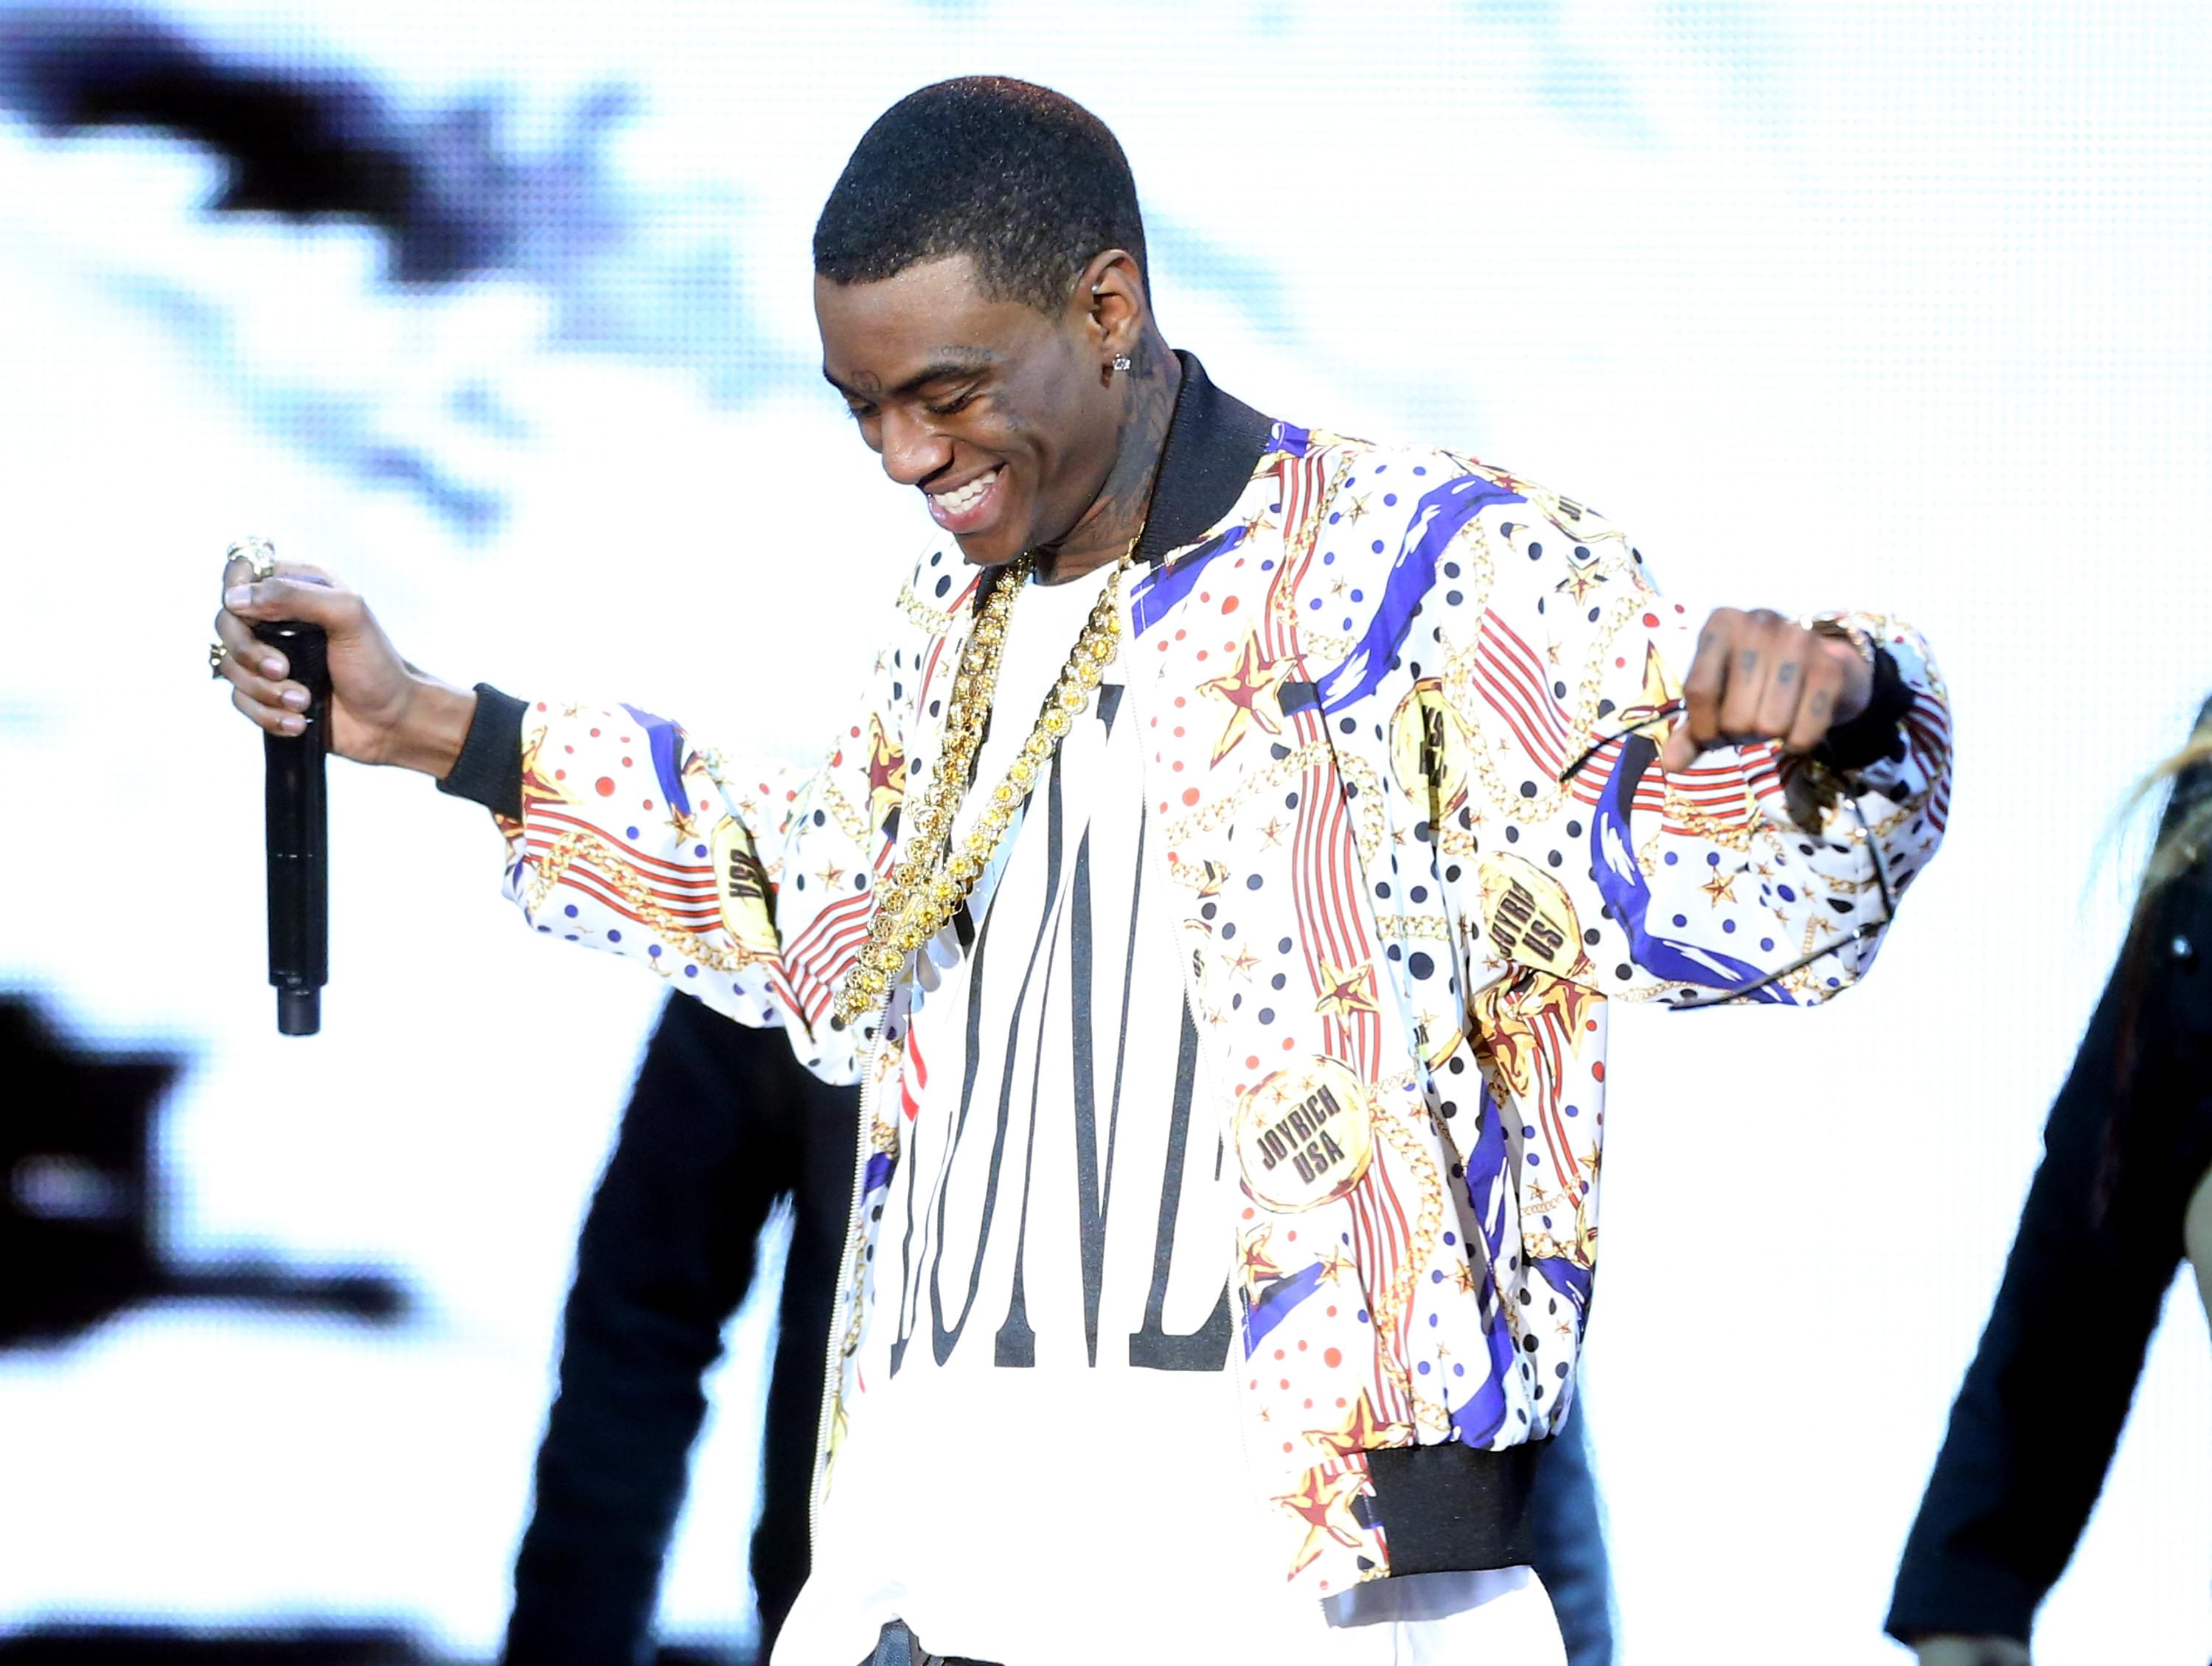 Soulja Boy Disses Tyga And Says He’s The Biggest Comeback Of 2018